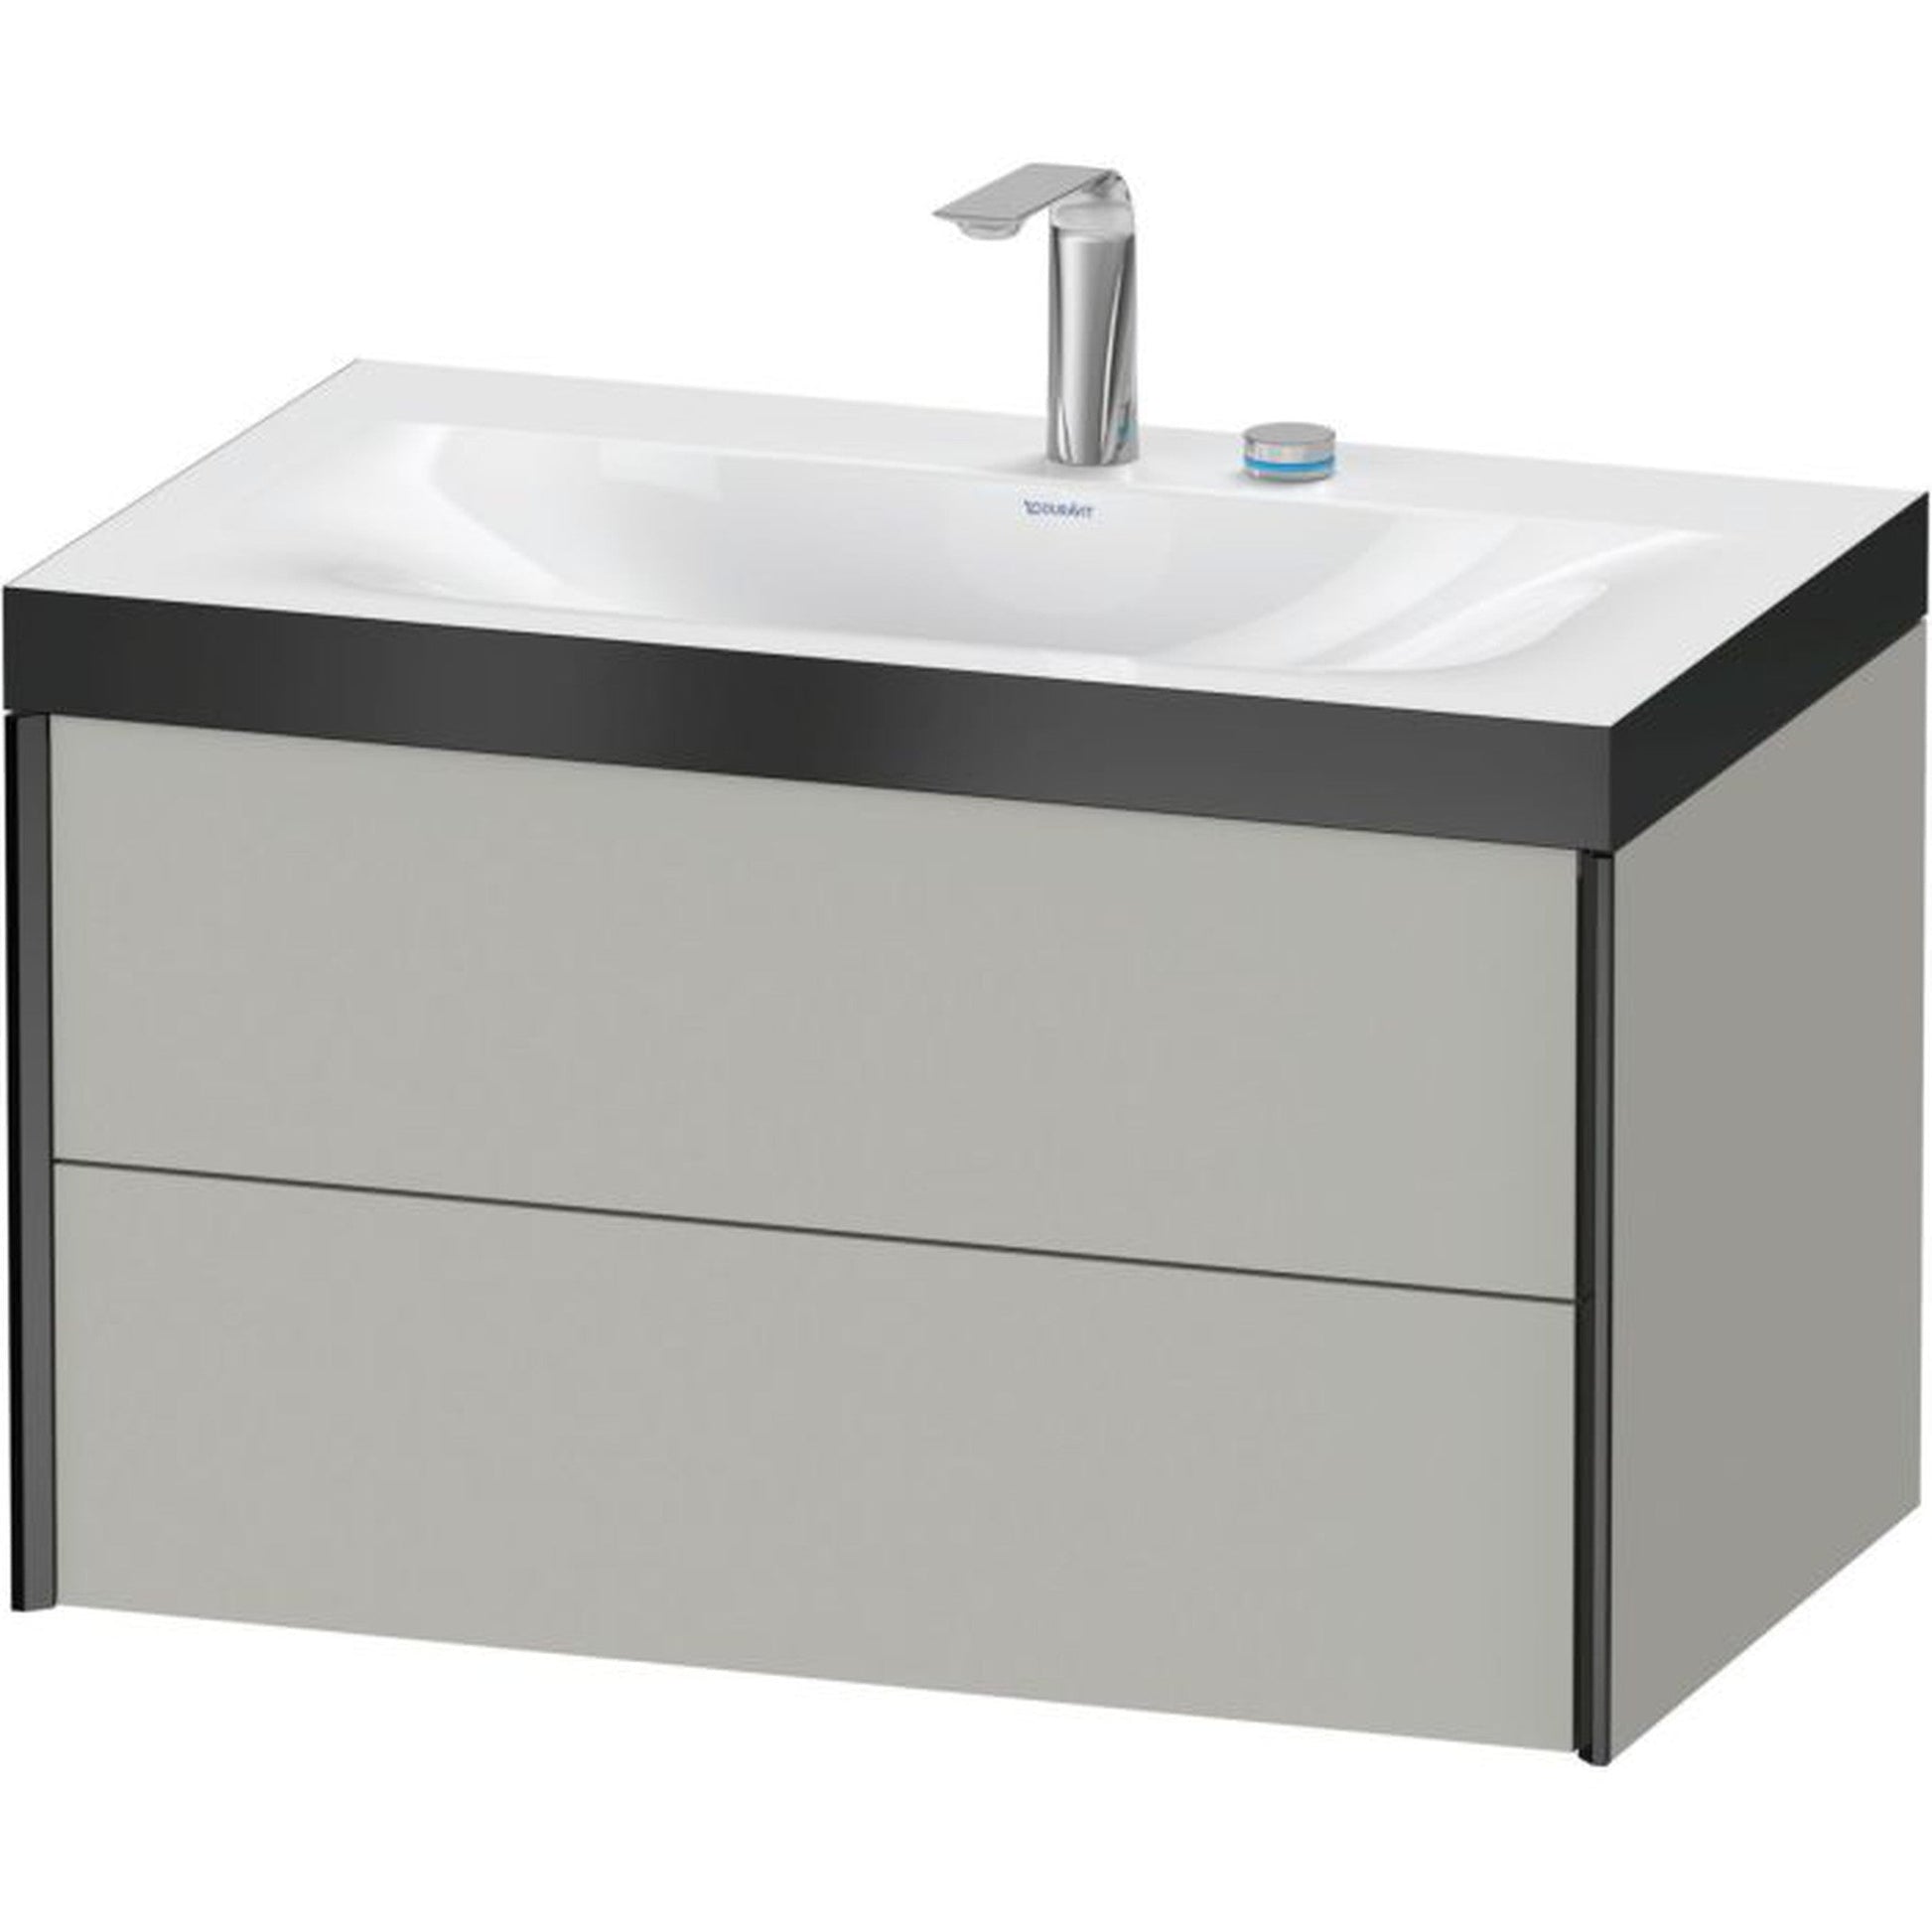 Duravit Xviu 31" x 20" x 19" Two Drawer C-Bonded Wall-Mount Vanity Kit With Two Tap Holes, Concrete Gray (XV4615EB207P)